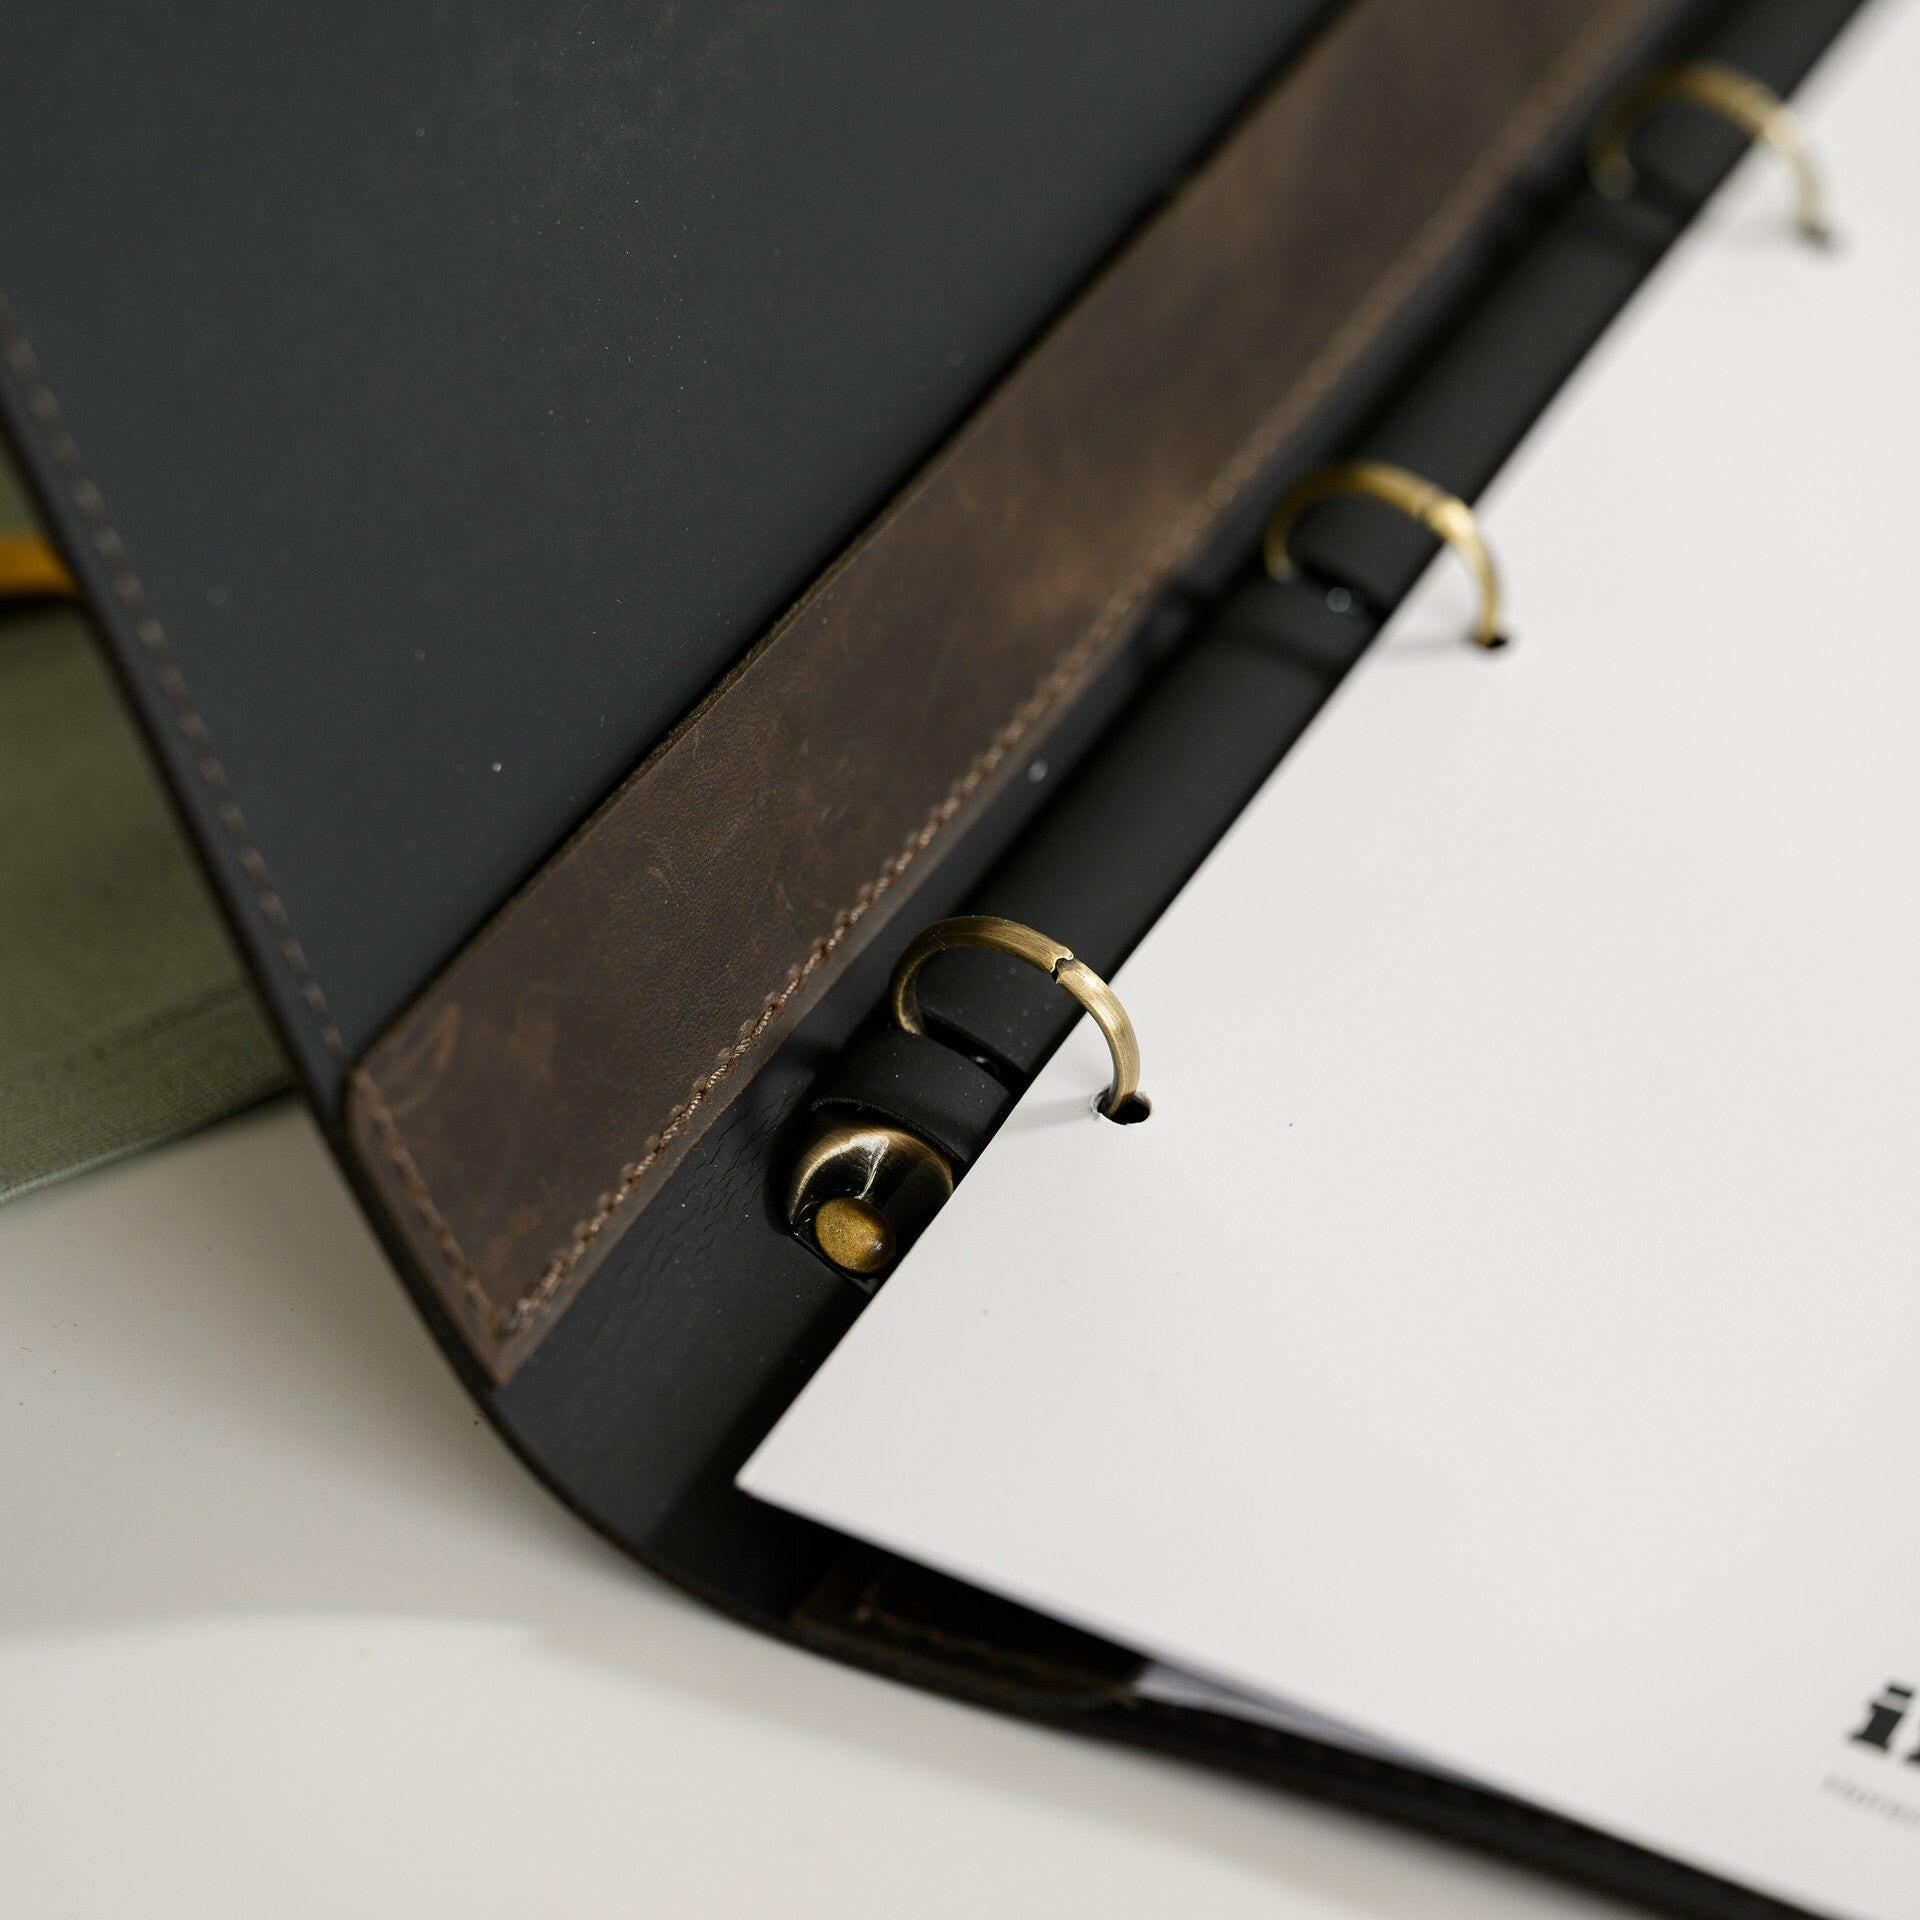 Leather Menu Folder with Brass Ring Binder and Corner Mountings suitable for US Legal Sheets (LM11A1)